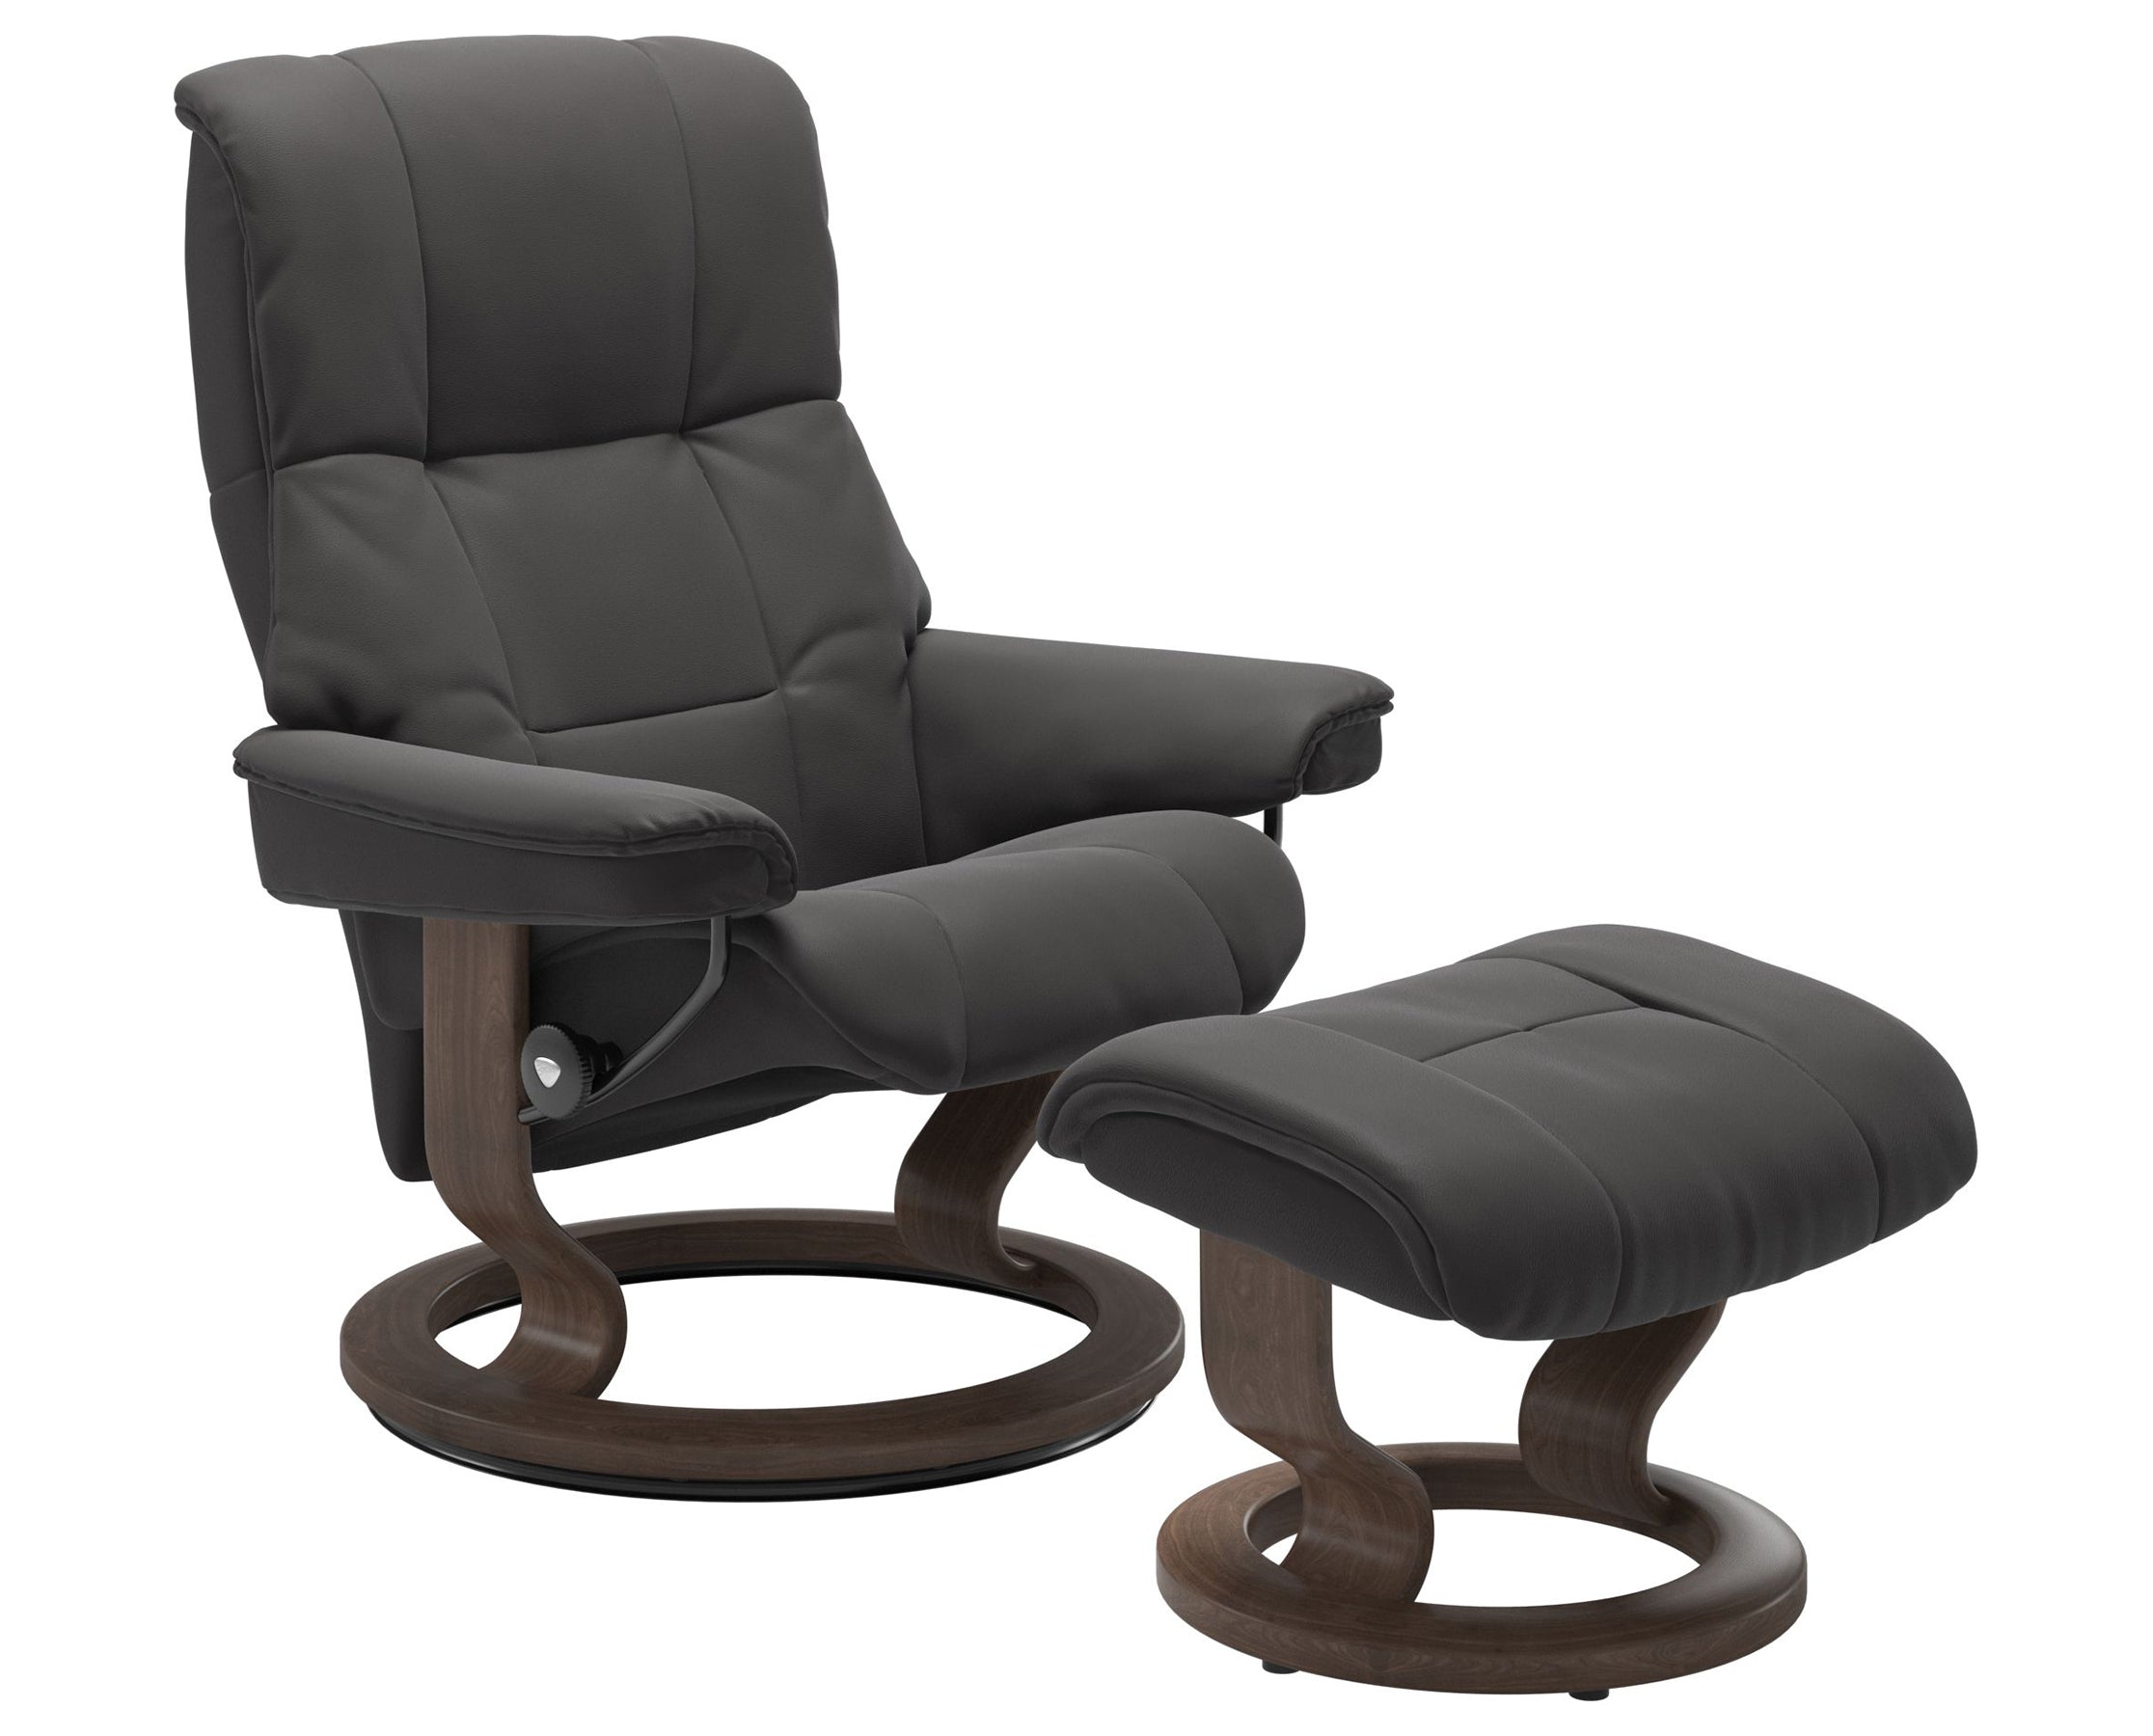 Paloma Leather Rock S/M/L and Walnut Base | Stressless Mayfair Classic Recliner | Valley Ridge Furniture